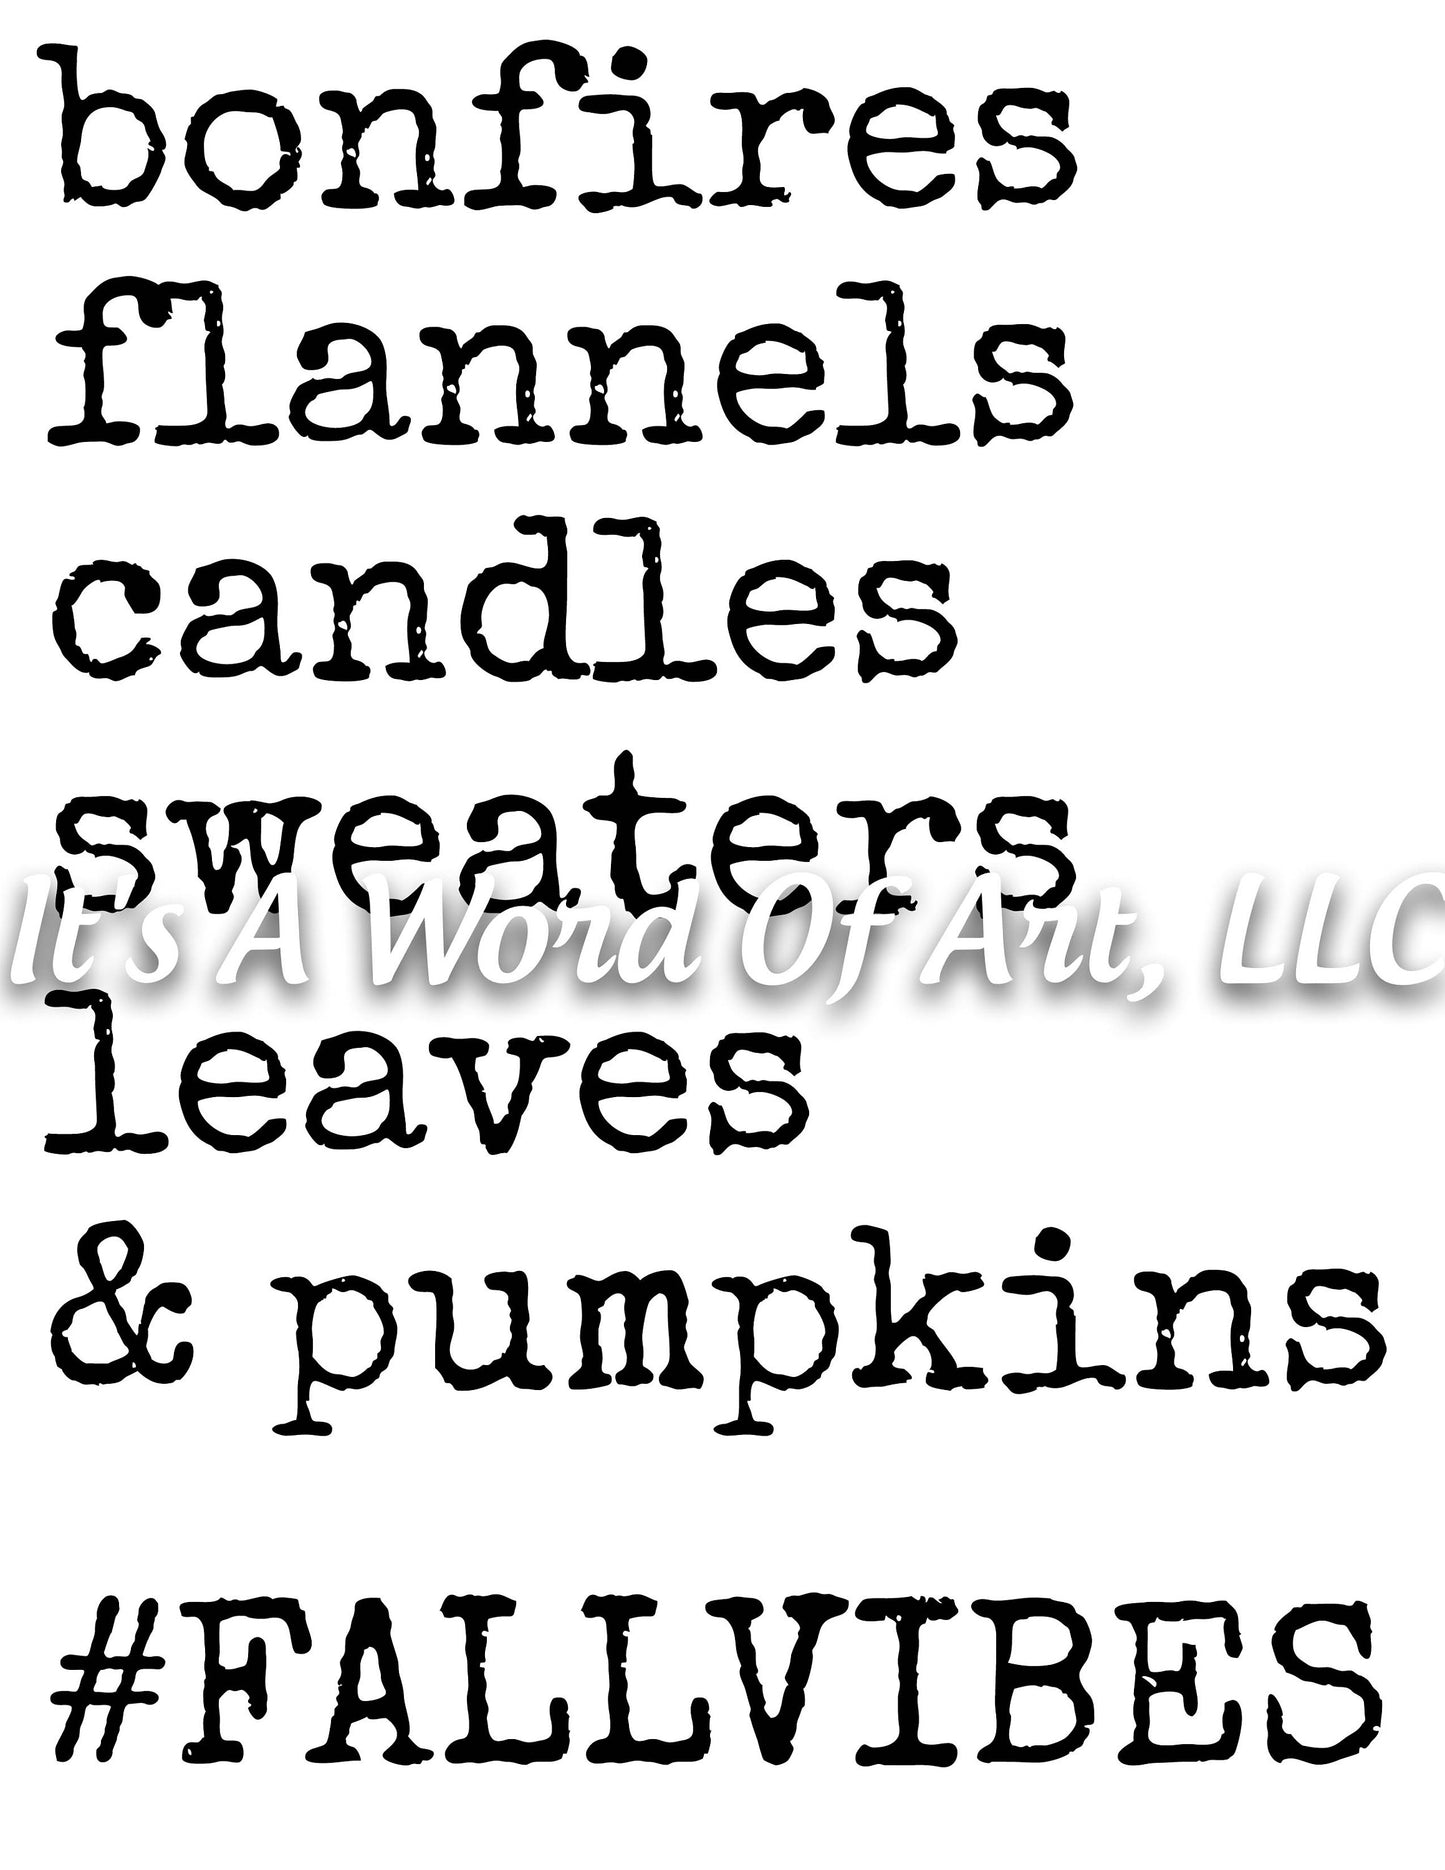 Fall 73 - Bonfires Flannels Candles Sweaters Leaves Fall Vibes- Sublimation Transfer Set/Ready To Press Sublimation Transfer Sub Transfer